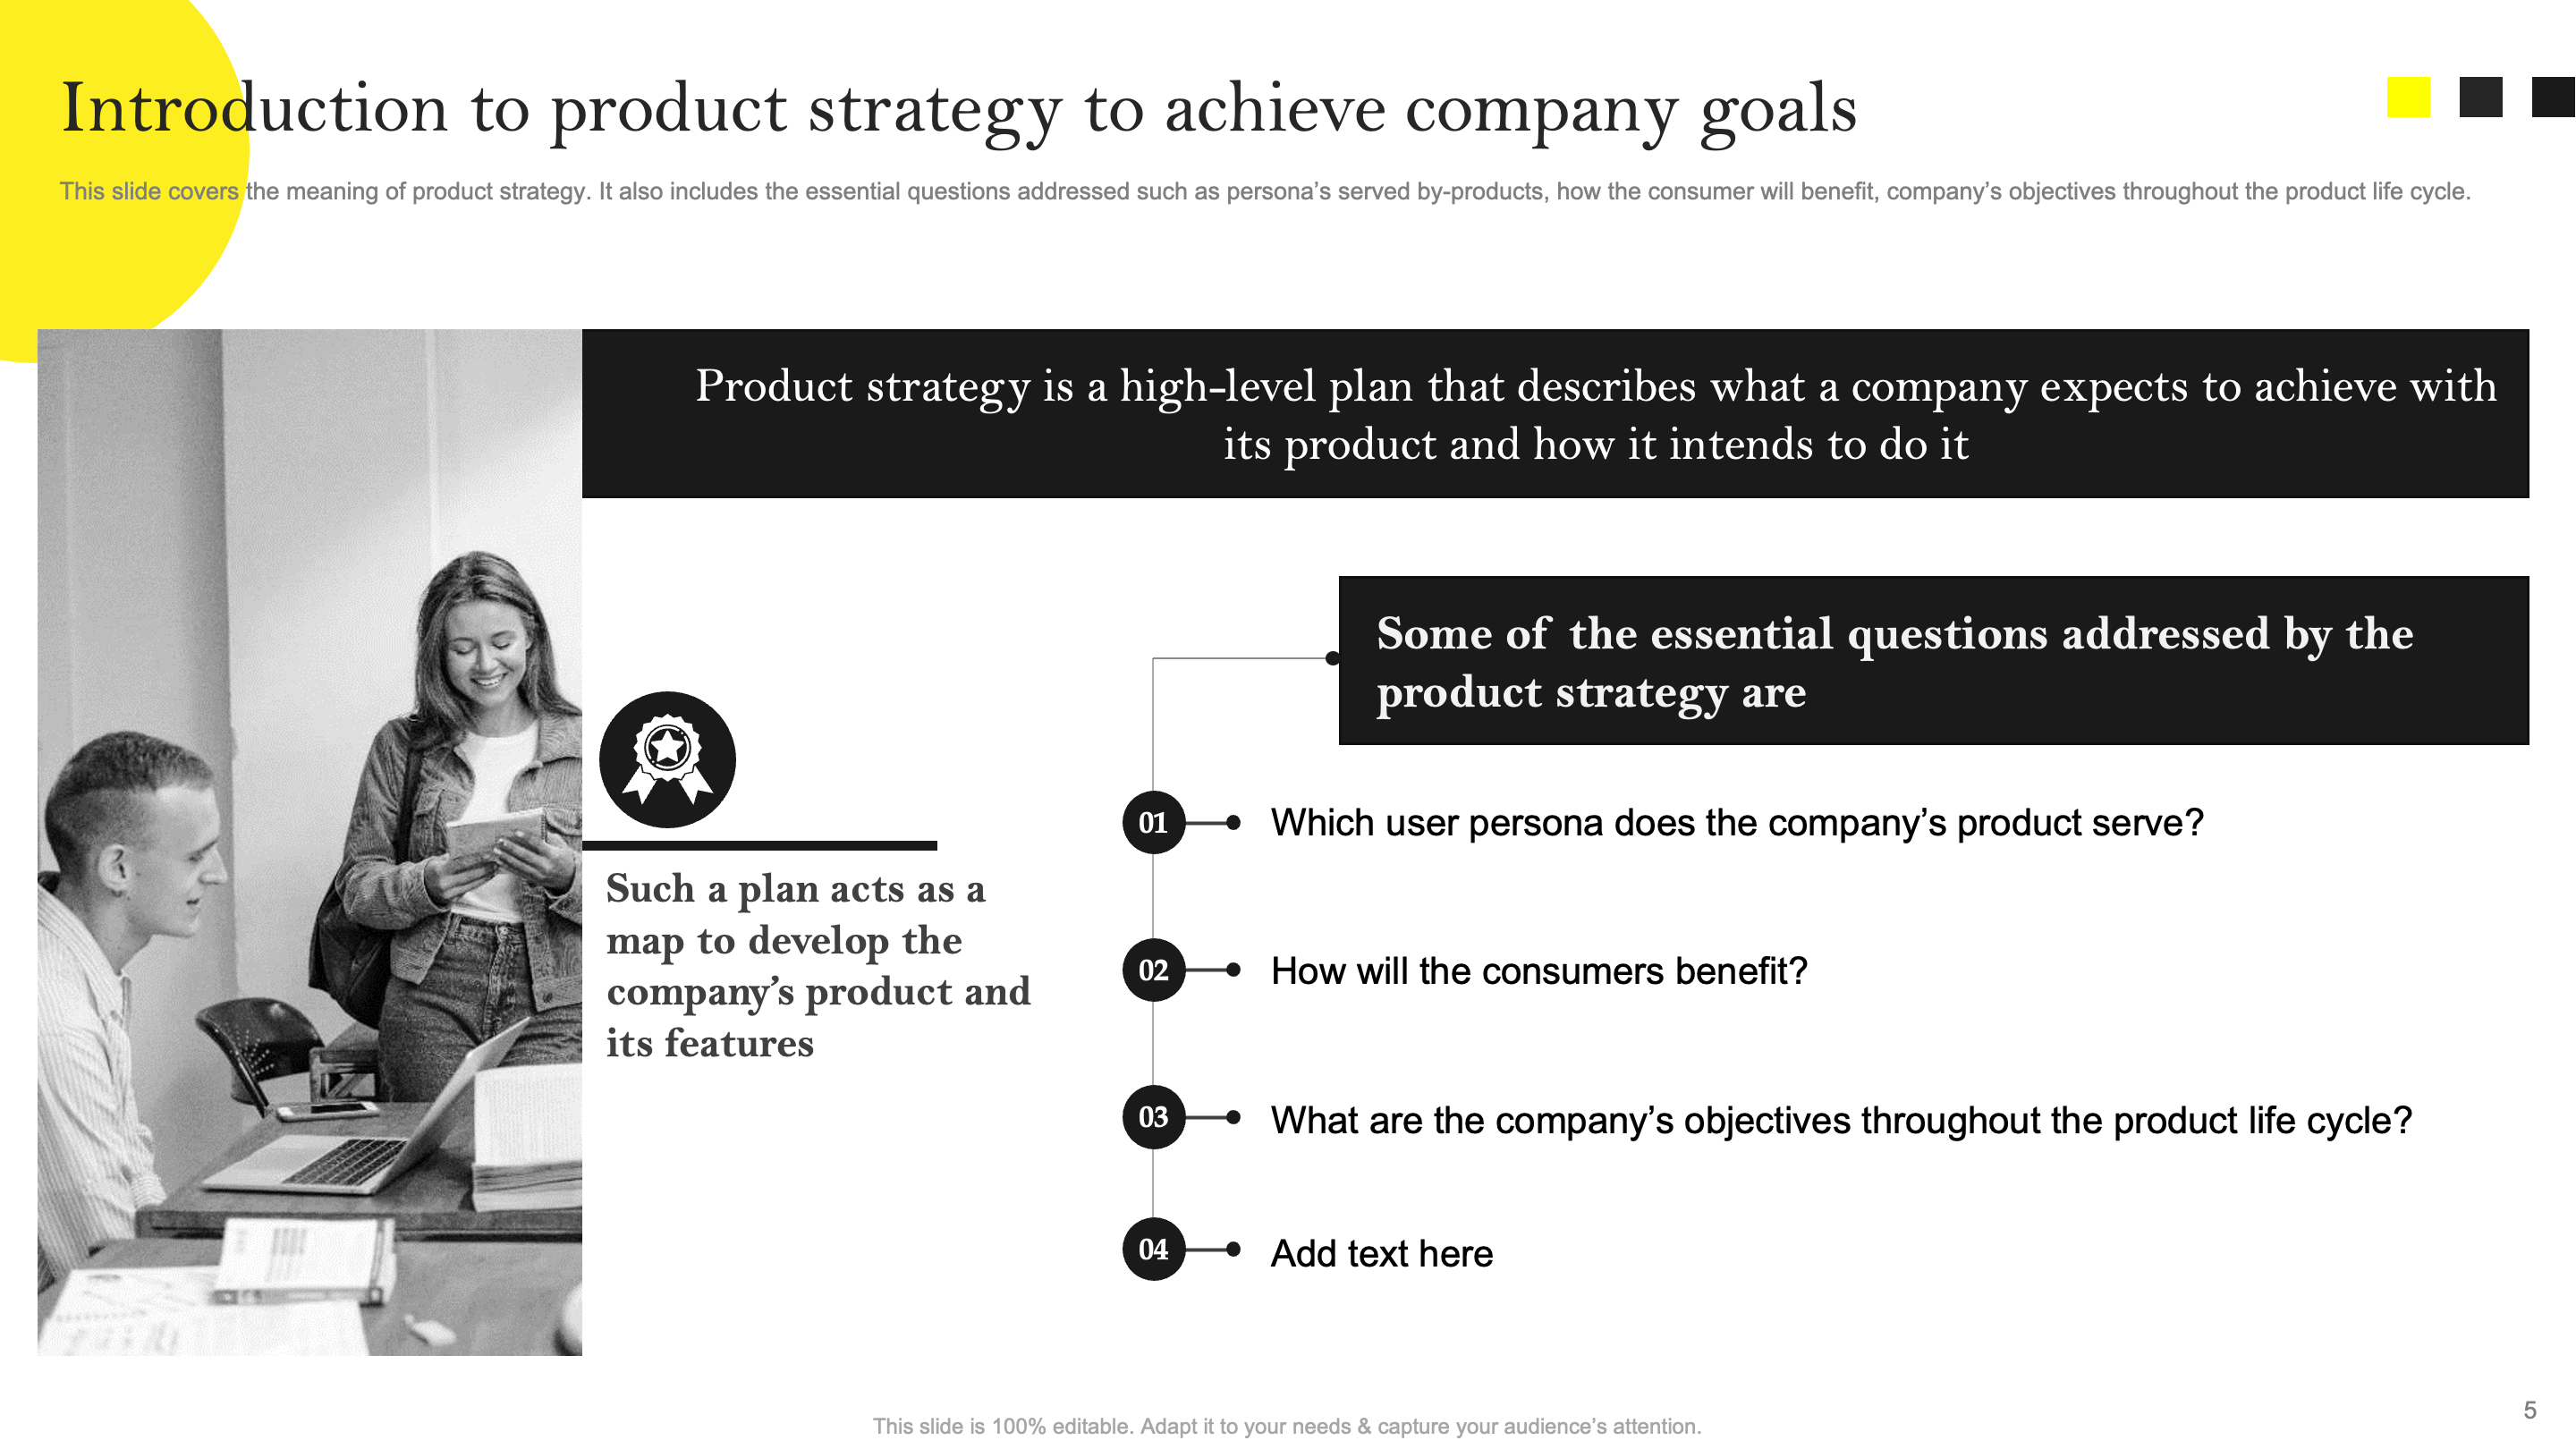 Introduction to Product Strategy 